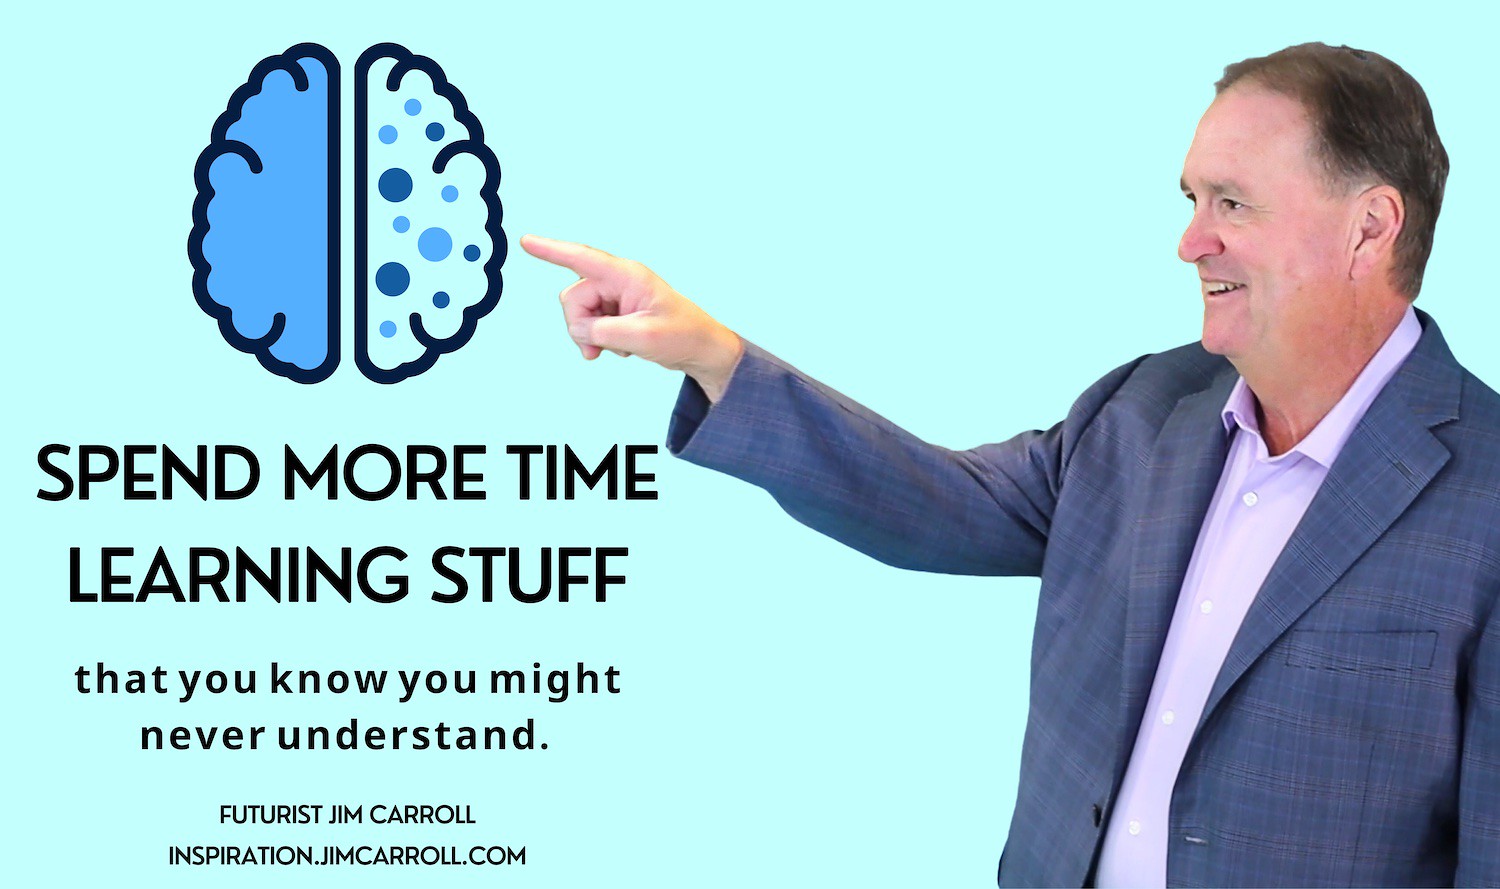 "Spend more time learning stuff that you know you might never understand." - Futurist Jim Carroll